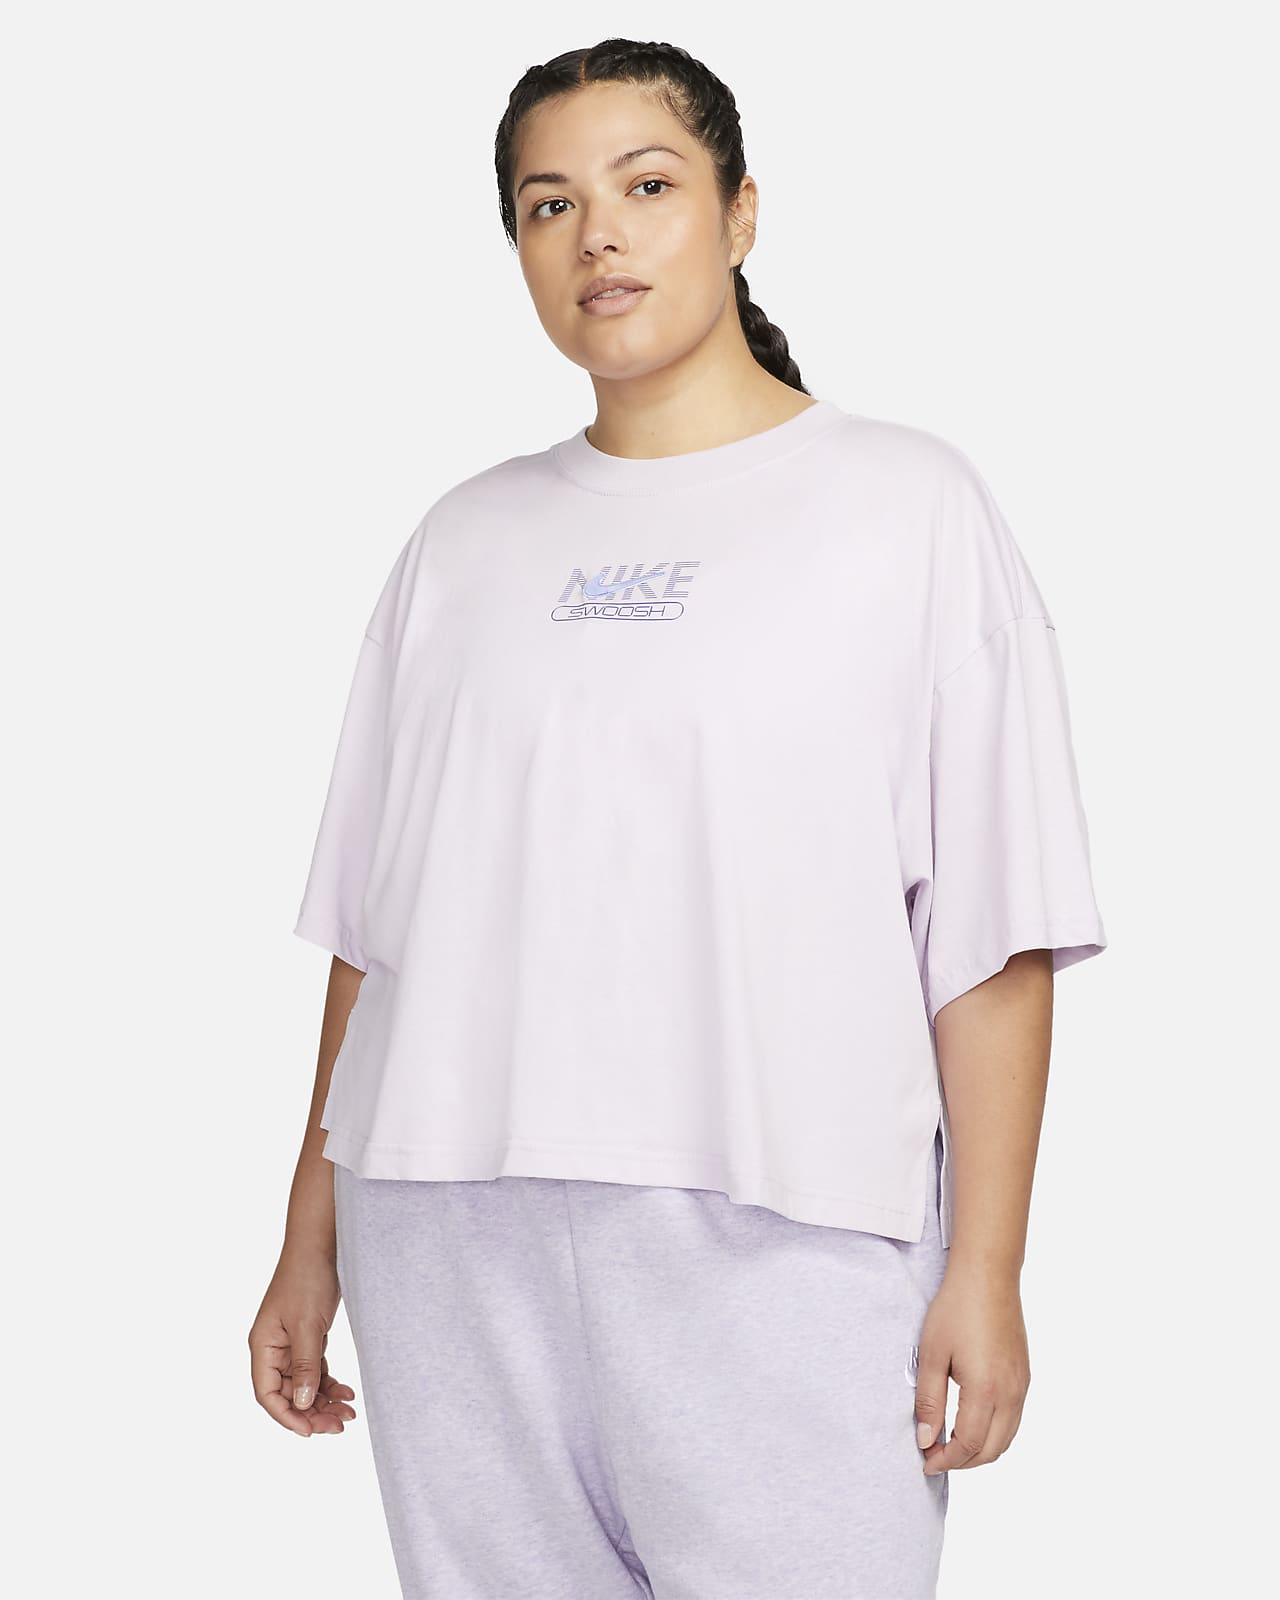 https://static.nike.com/a/images/t_PDP_1280_v1/f_auto,q_auto:eco/d9e9cc94-1f28-4866-baa5-76eb2e0a1fd6/sportswear-swoosh-womens-cropped-short-sleeve-top-plus-size-9ddmss.png